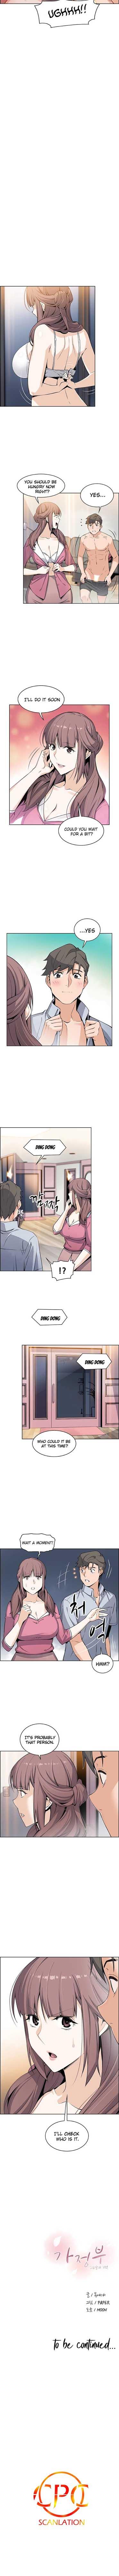 Housekeeper [Neck Pillow, Paper] Ch.49/49 [English] [Manhwa PDF] Completed 248